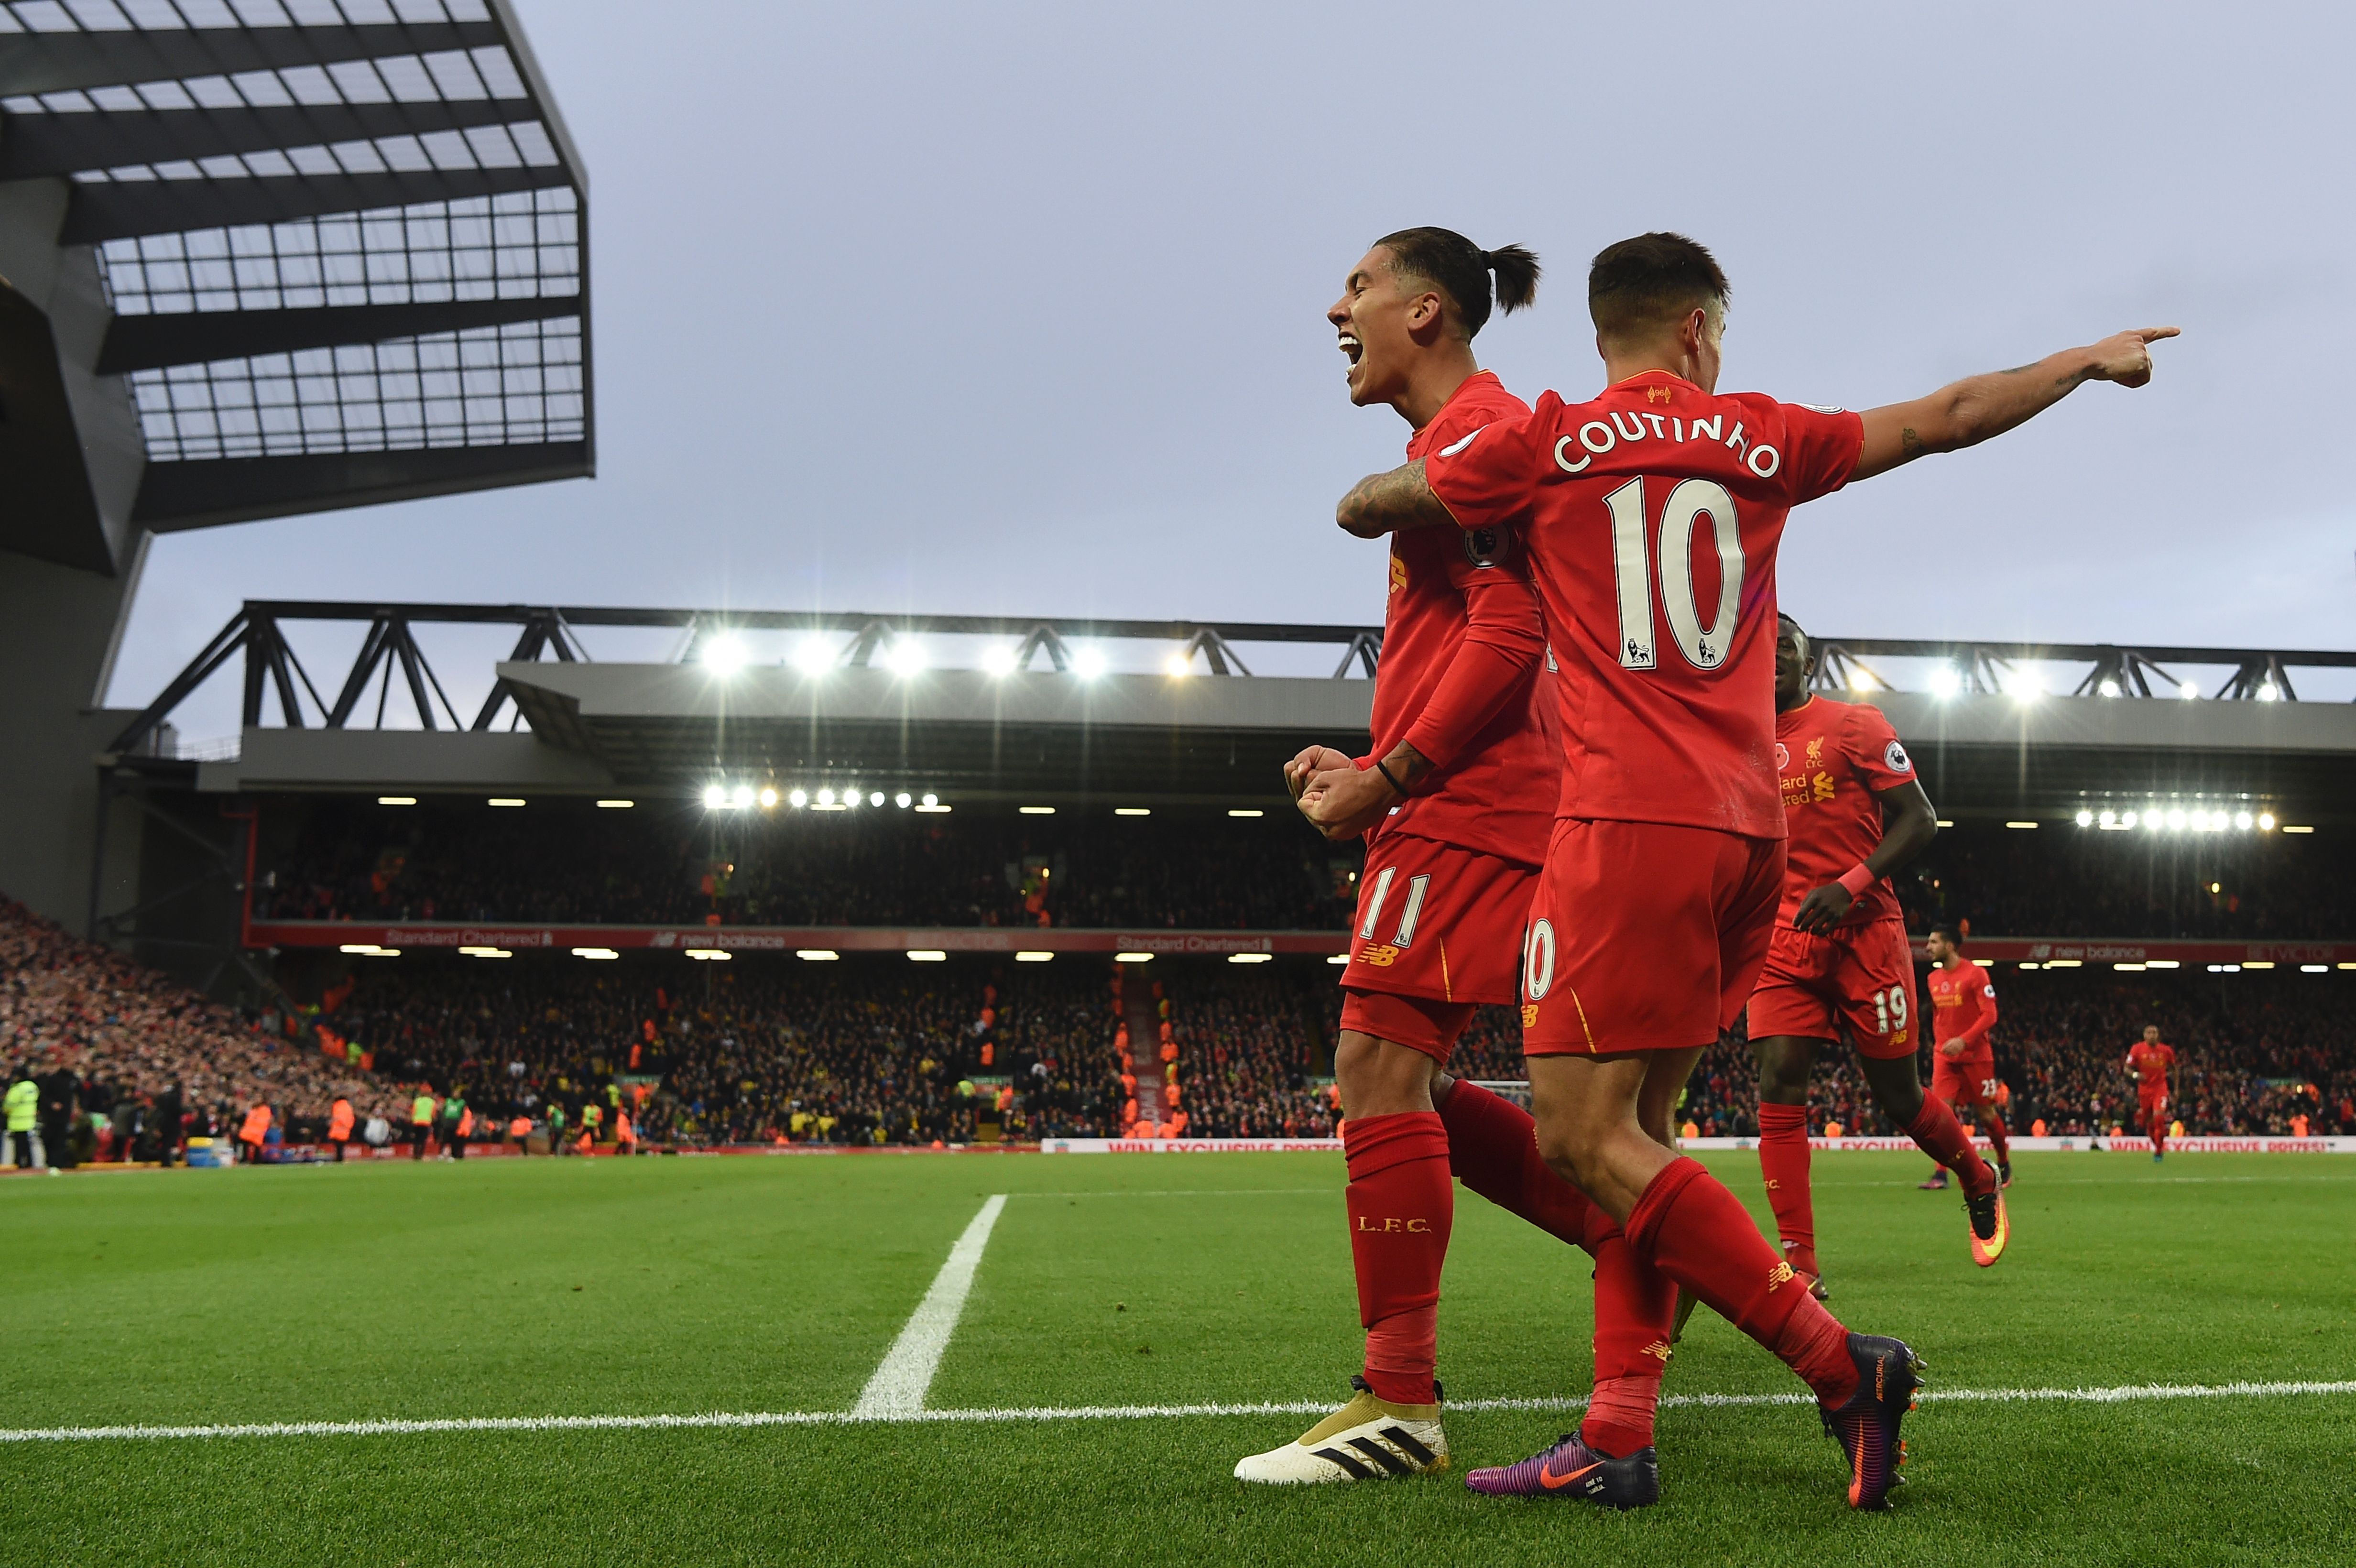 Liverpool's Brazilian midfielder Roberto Firmino (L) celebrates scoring his team's fourth goal Liverpool's Brazilian midfielder Philippe Coutinho with during the English Premier League football match between Liverpool and Watford at Anfield in Liverpool, north west England on November 6, 2016. / AFP / PAUL ELLIS / RESTRICTED TO EDITORIAL USE. No use with unauthorized audio, video, data, fixture lists, club/league logos or 'live' services. Online in-match use limited to 75 images, no video emulation. No use in betting, games or single club/league/player publications.  /         (Photo credit should read PAUL ELLIS/AFP/Getty Images)